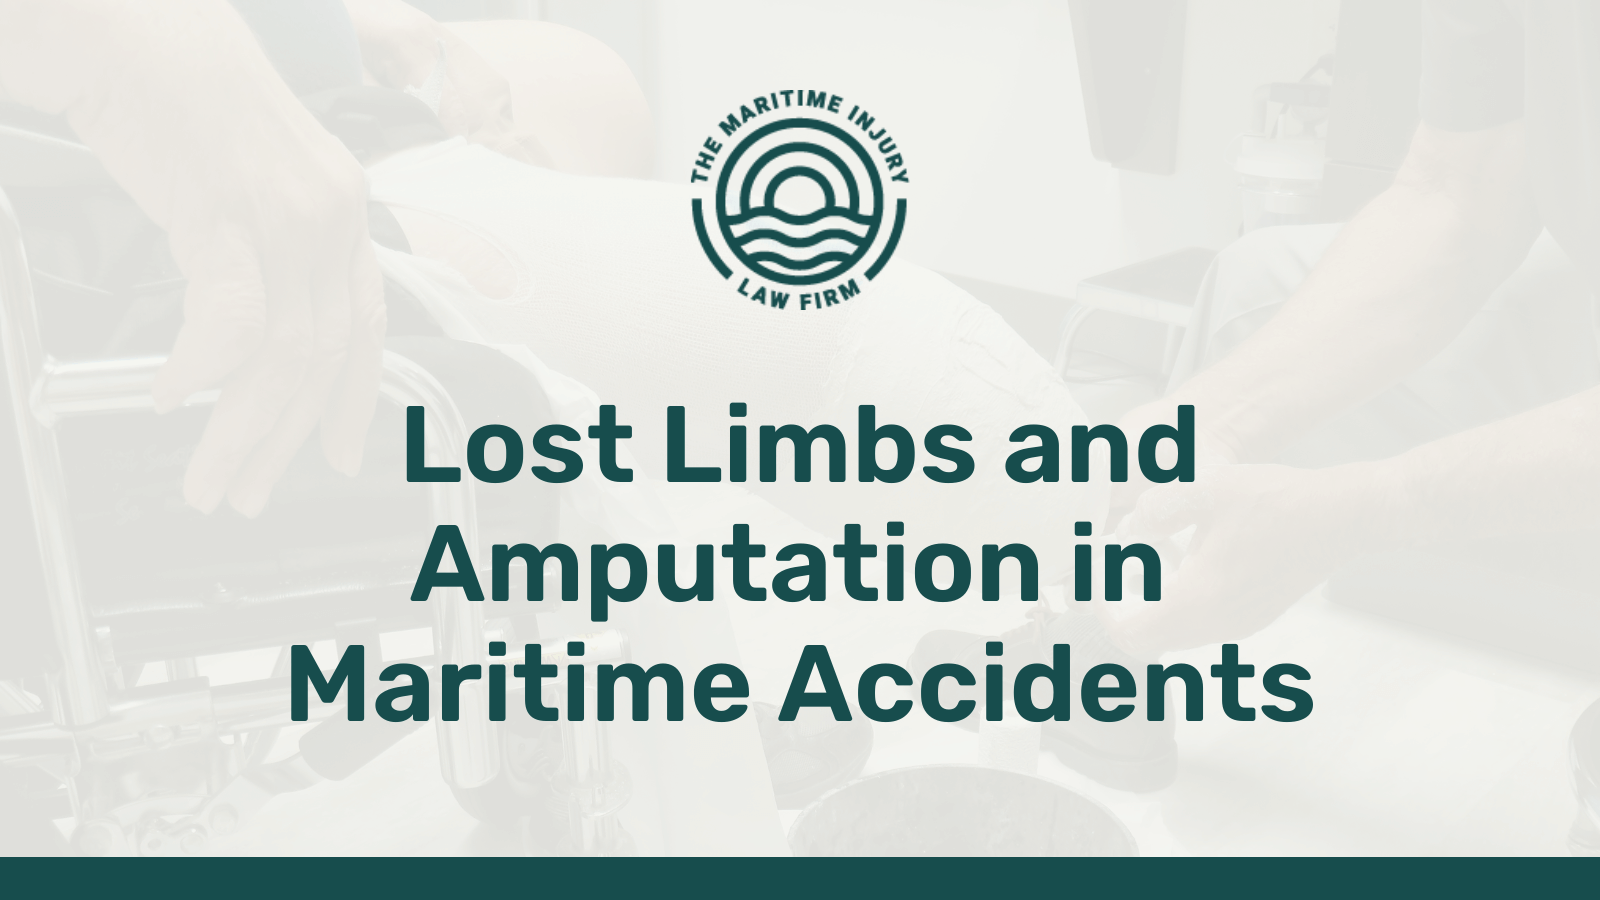 Lost Limbs and Amputation in Maritime Accidents - maritime injury law firm - George Vourvoulias